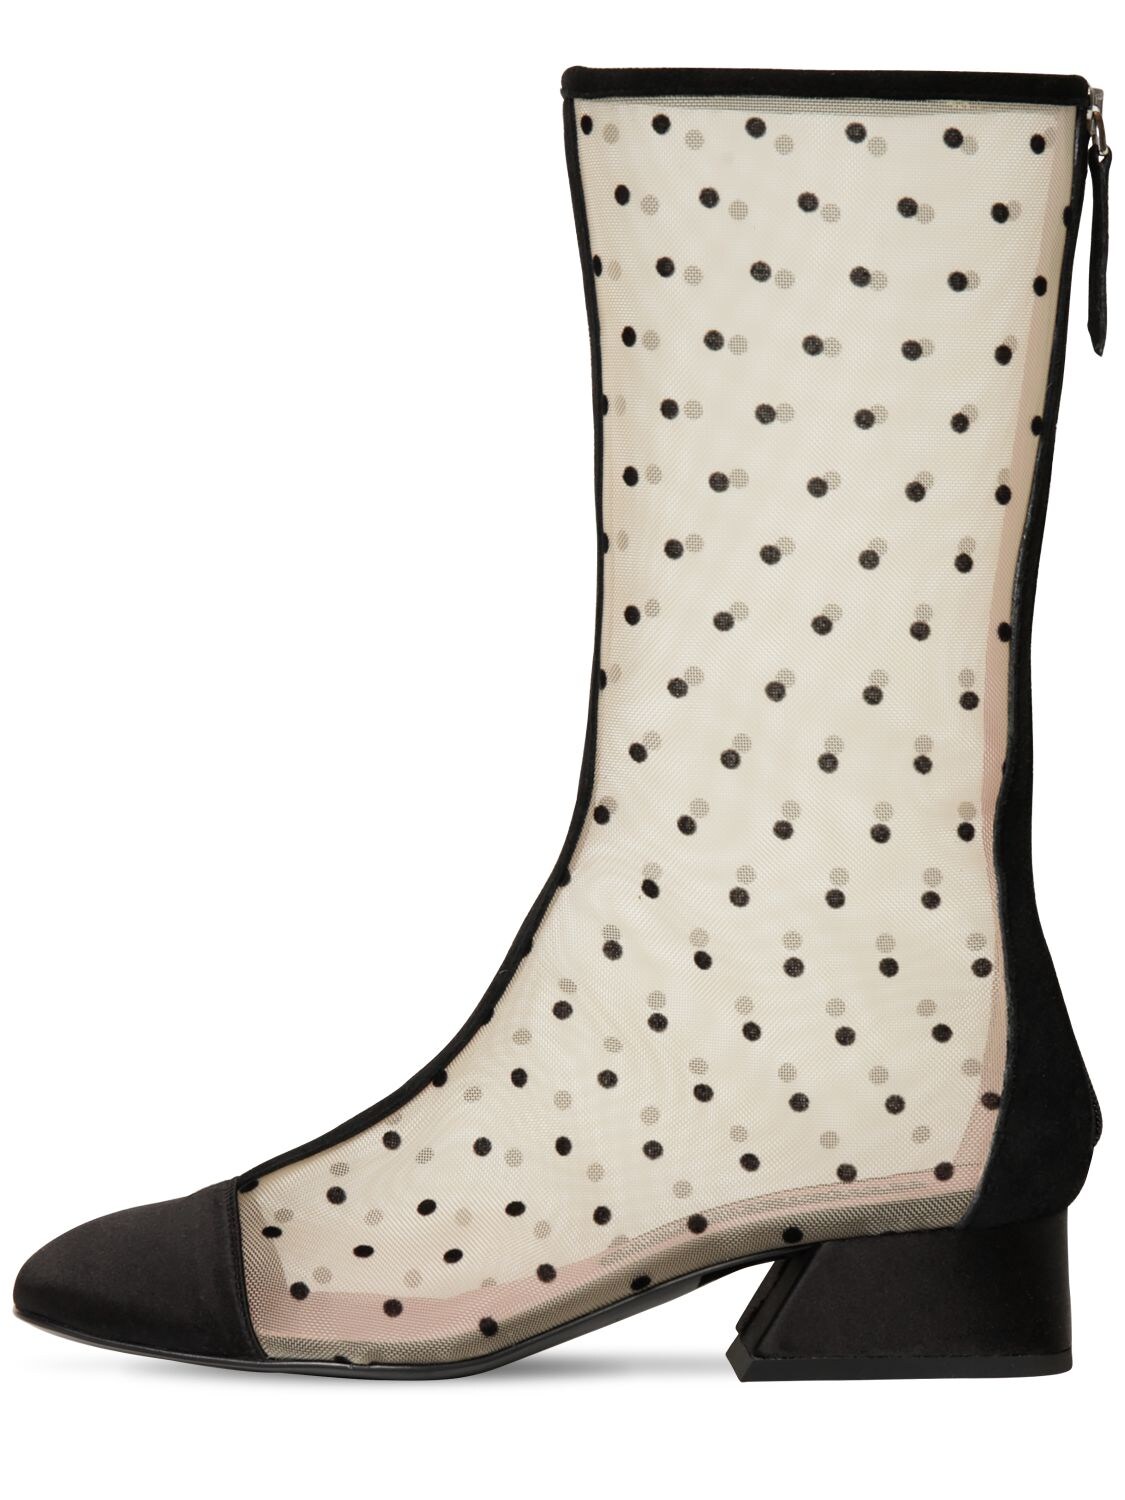 Les Petits Joueurs 35mm Mesh & Suede Boots In Black,nude